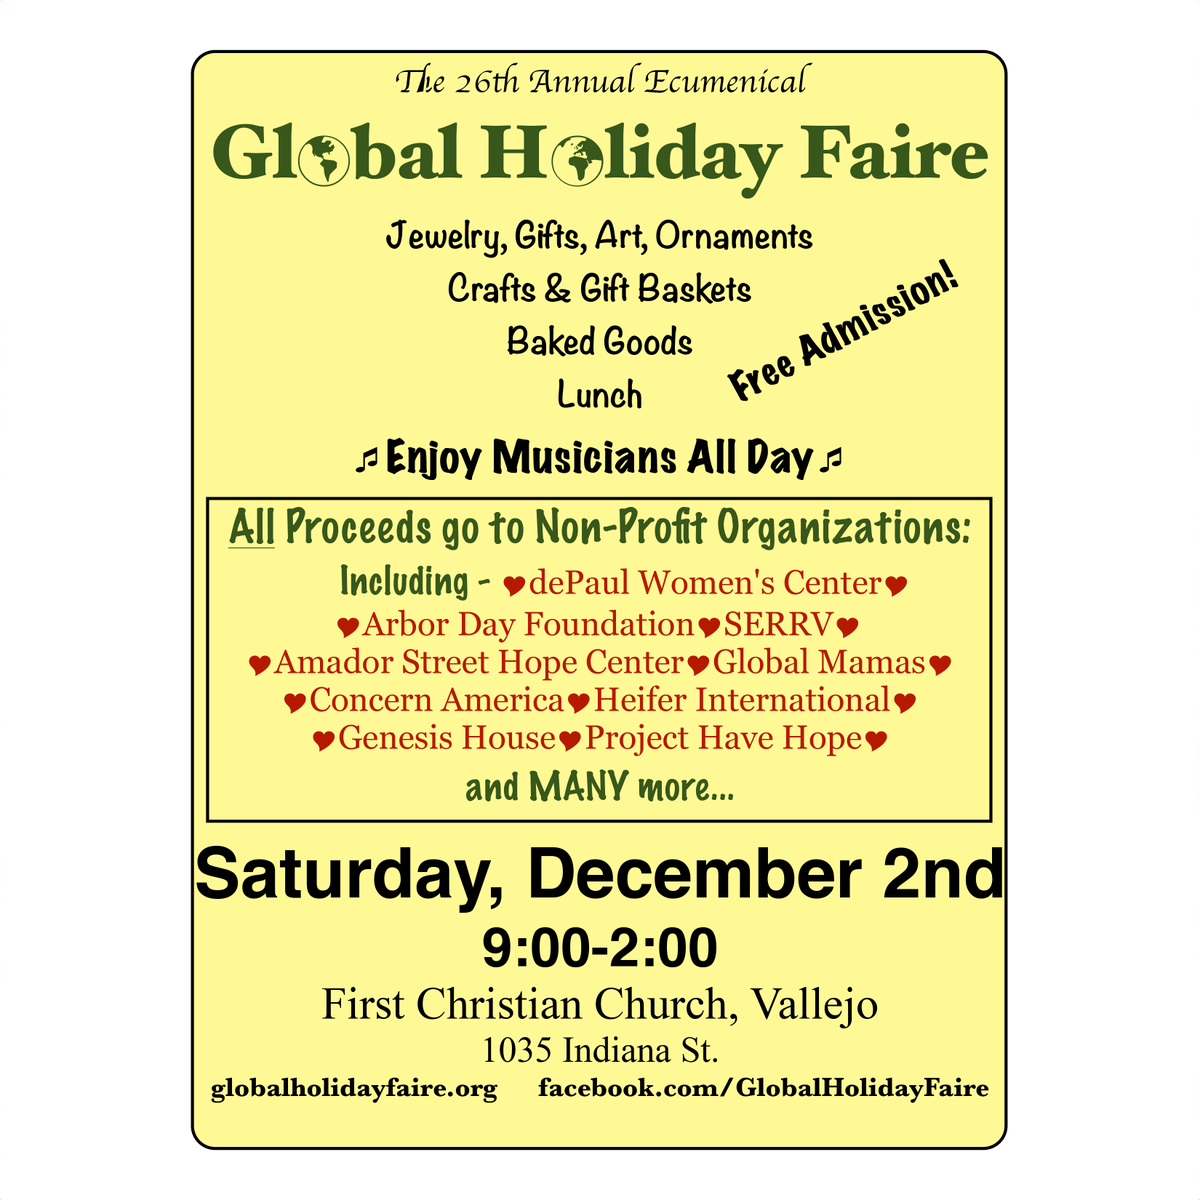 Embrace the spirit of giving at the 26th Annual Ecumenical Global Holiday Faire on December 2nd! Join us at First Christian Church, Vallejo, located at 1035 Indiana St., for a day of joy, community, and meaningful impact.